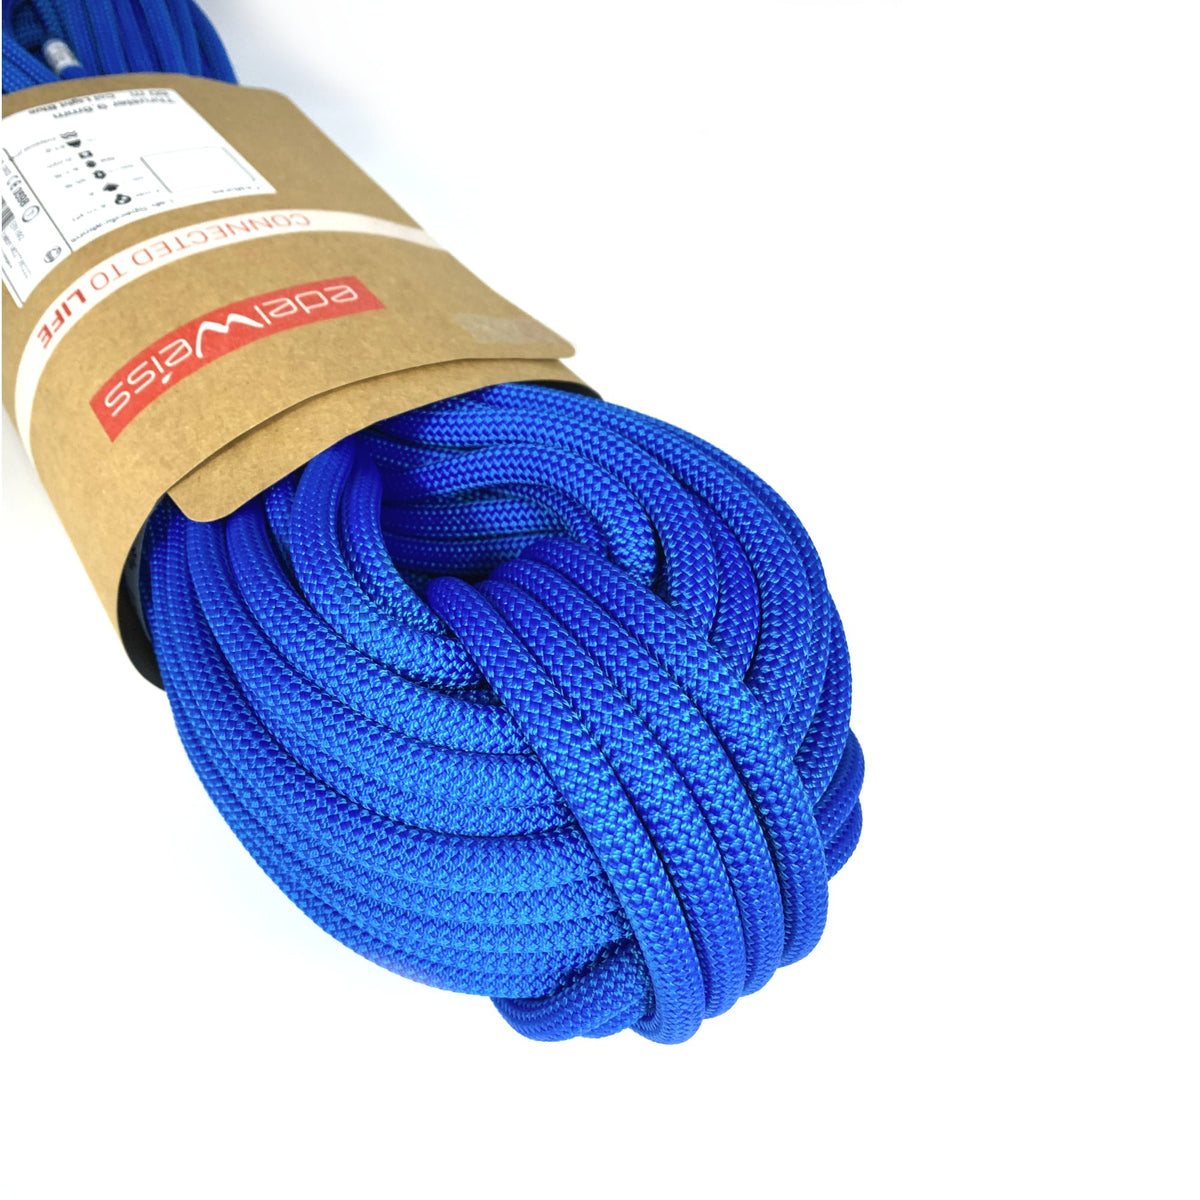 Edelweiss Thruster 9.8mm rope in blue